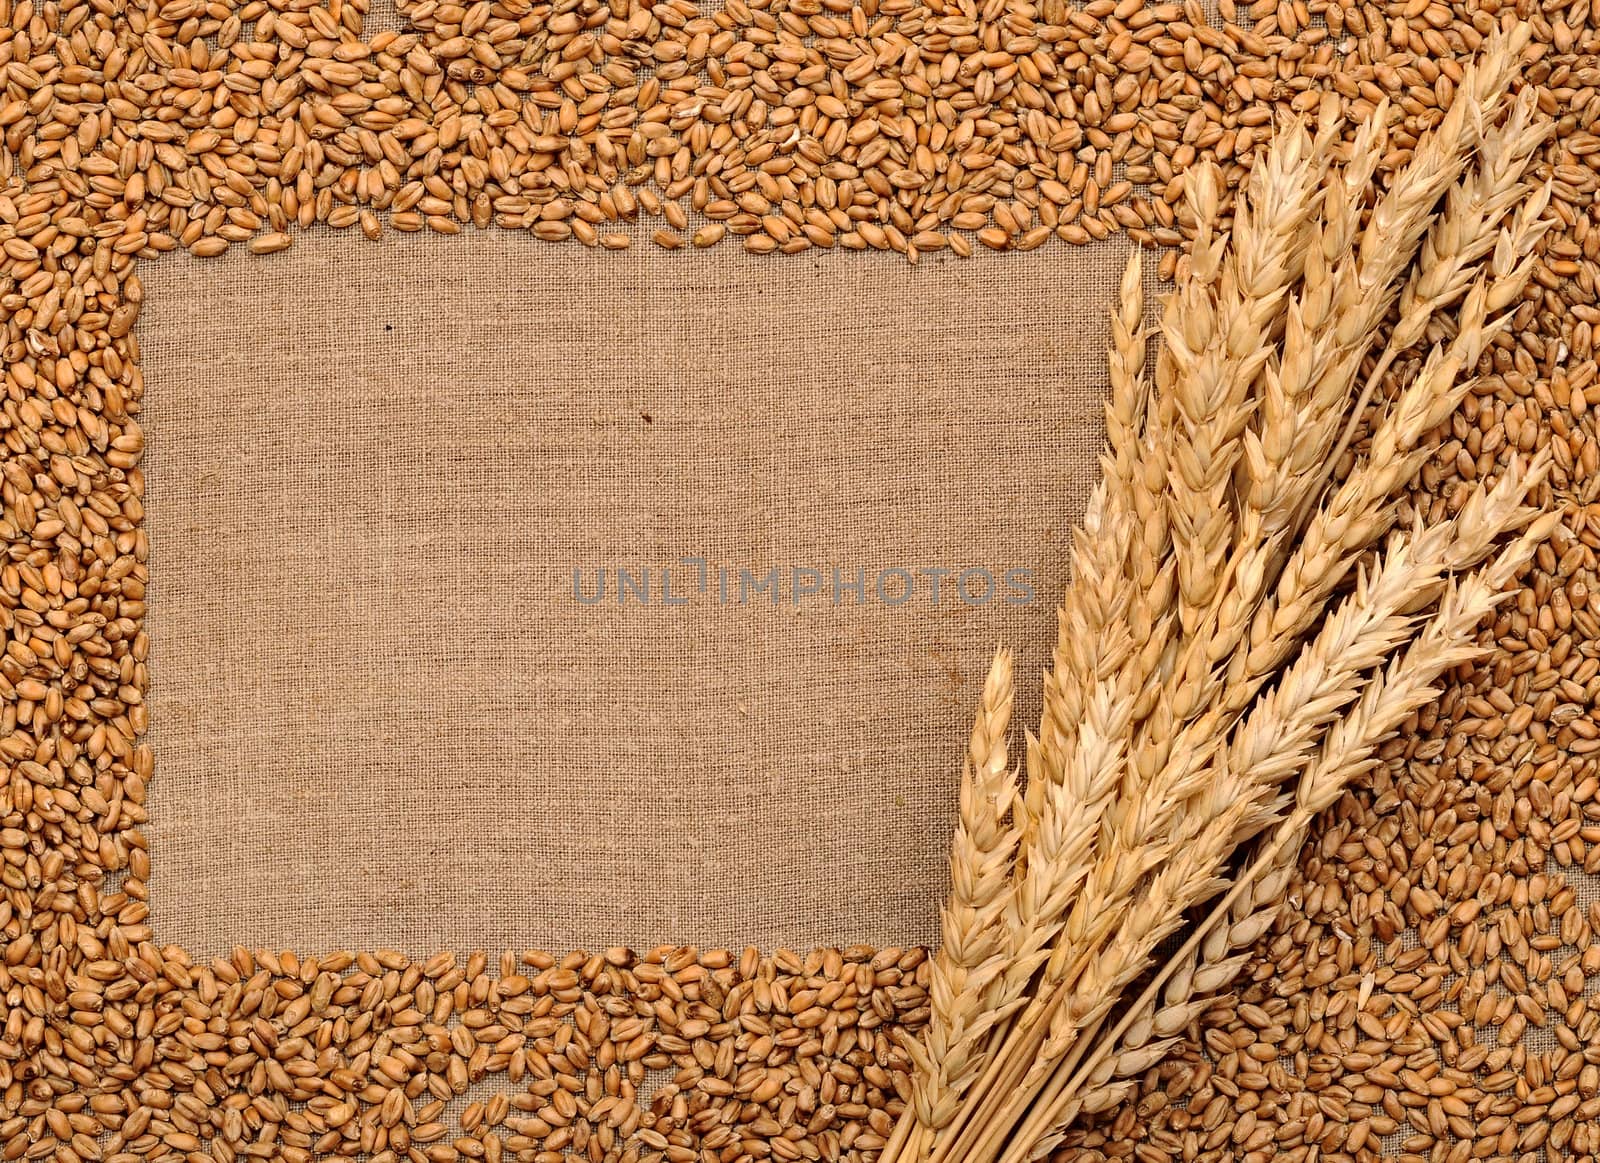 wheat ears on sacking by inxti